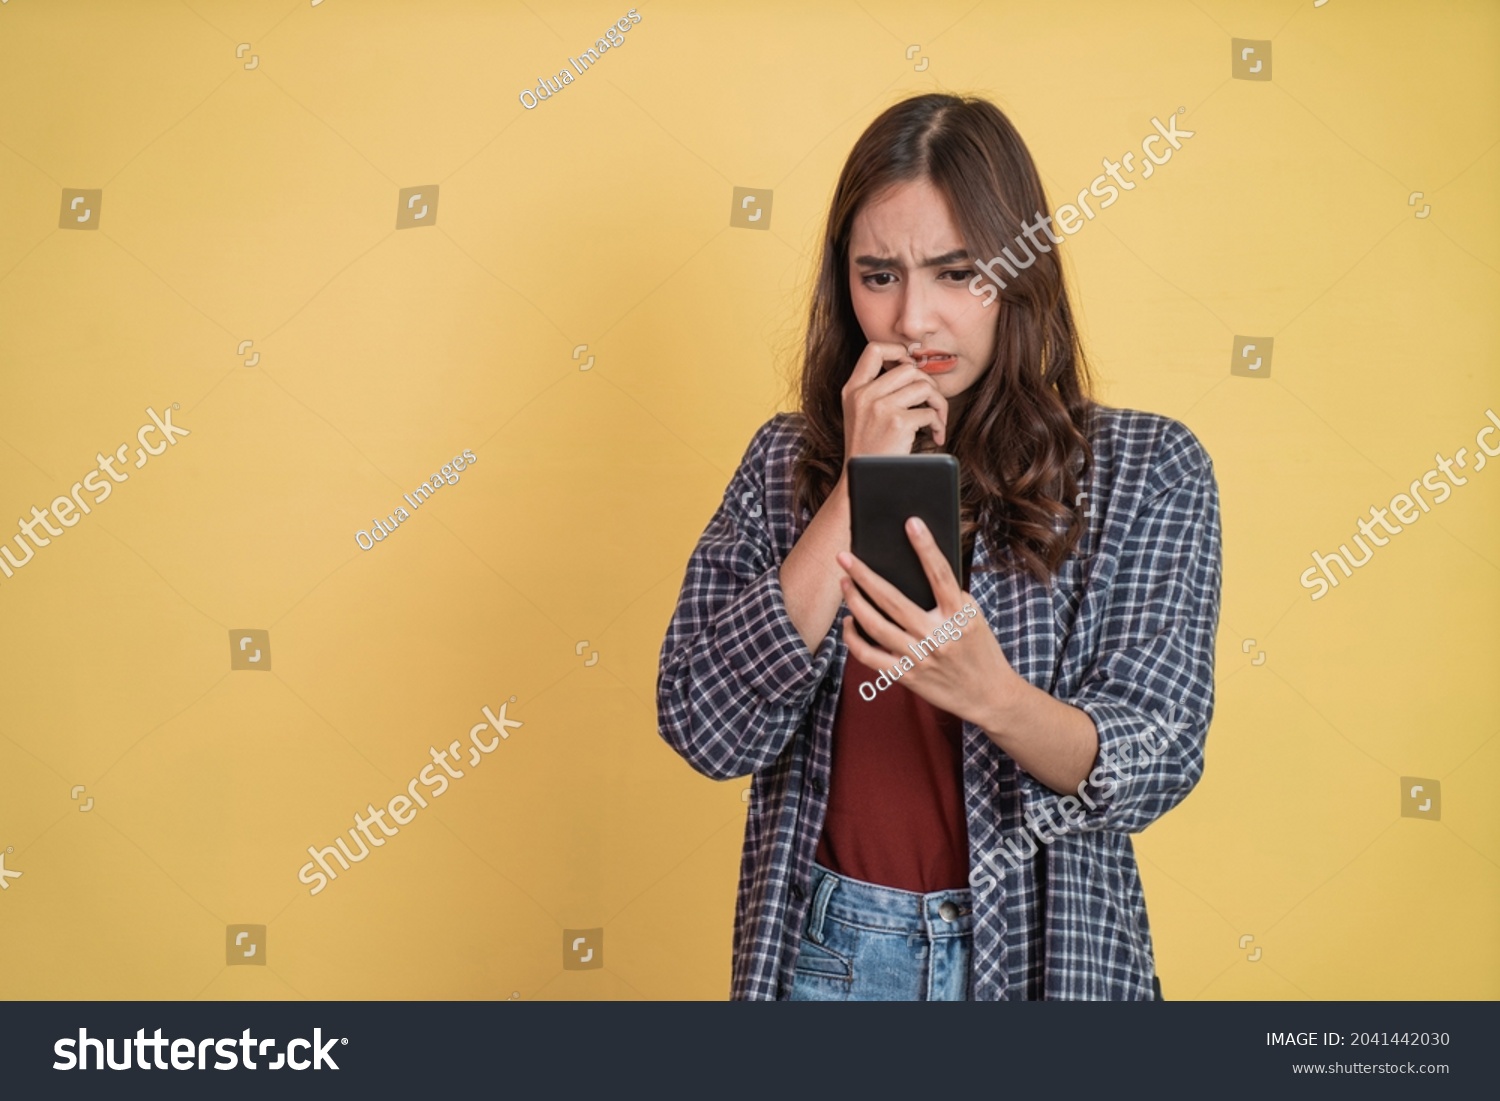 asian woman looking at screen while using a smartphone with worried expression with copyspace #2041442030